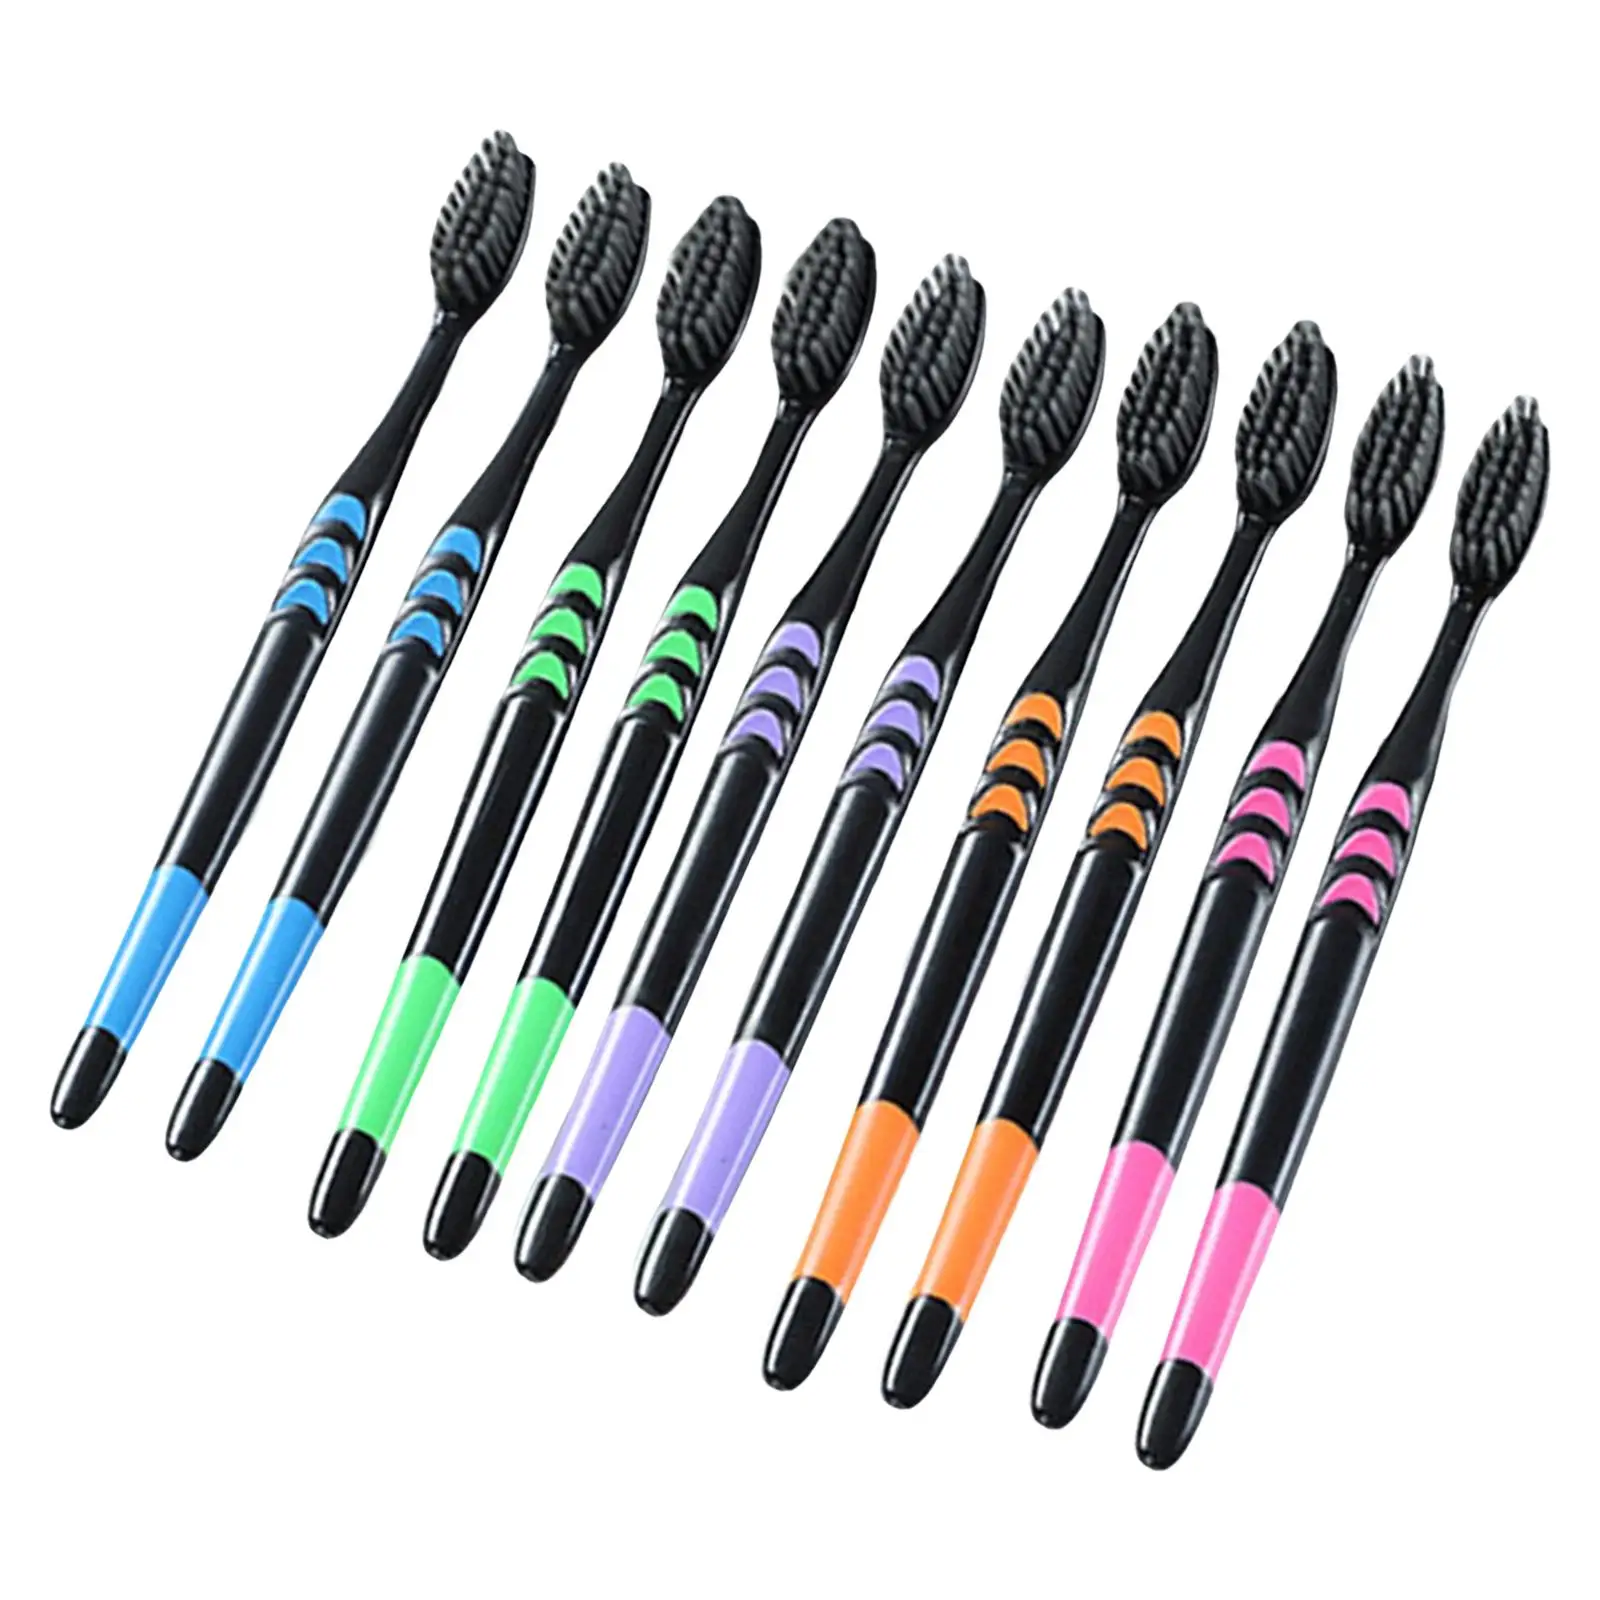 

10Pcs Soft Toothbrush Soft Micro Nano Bristles Eco Friendly Protection Gum Care Family Pack Gentle Manual Toothbrushes for Adult